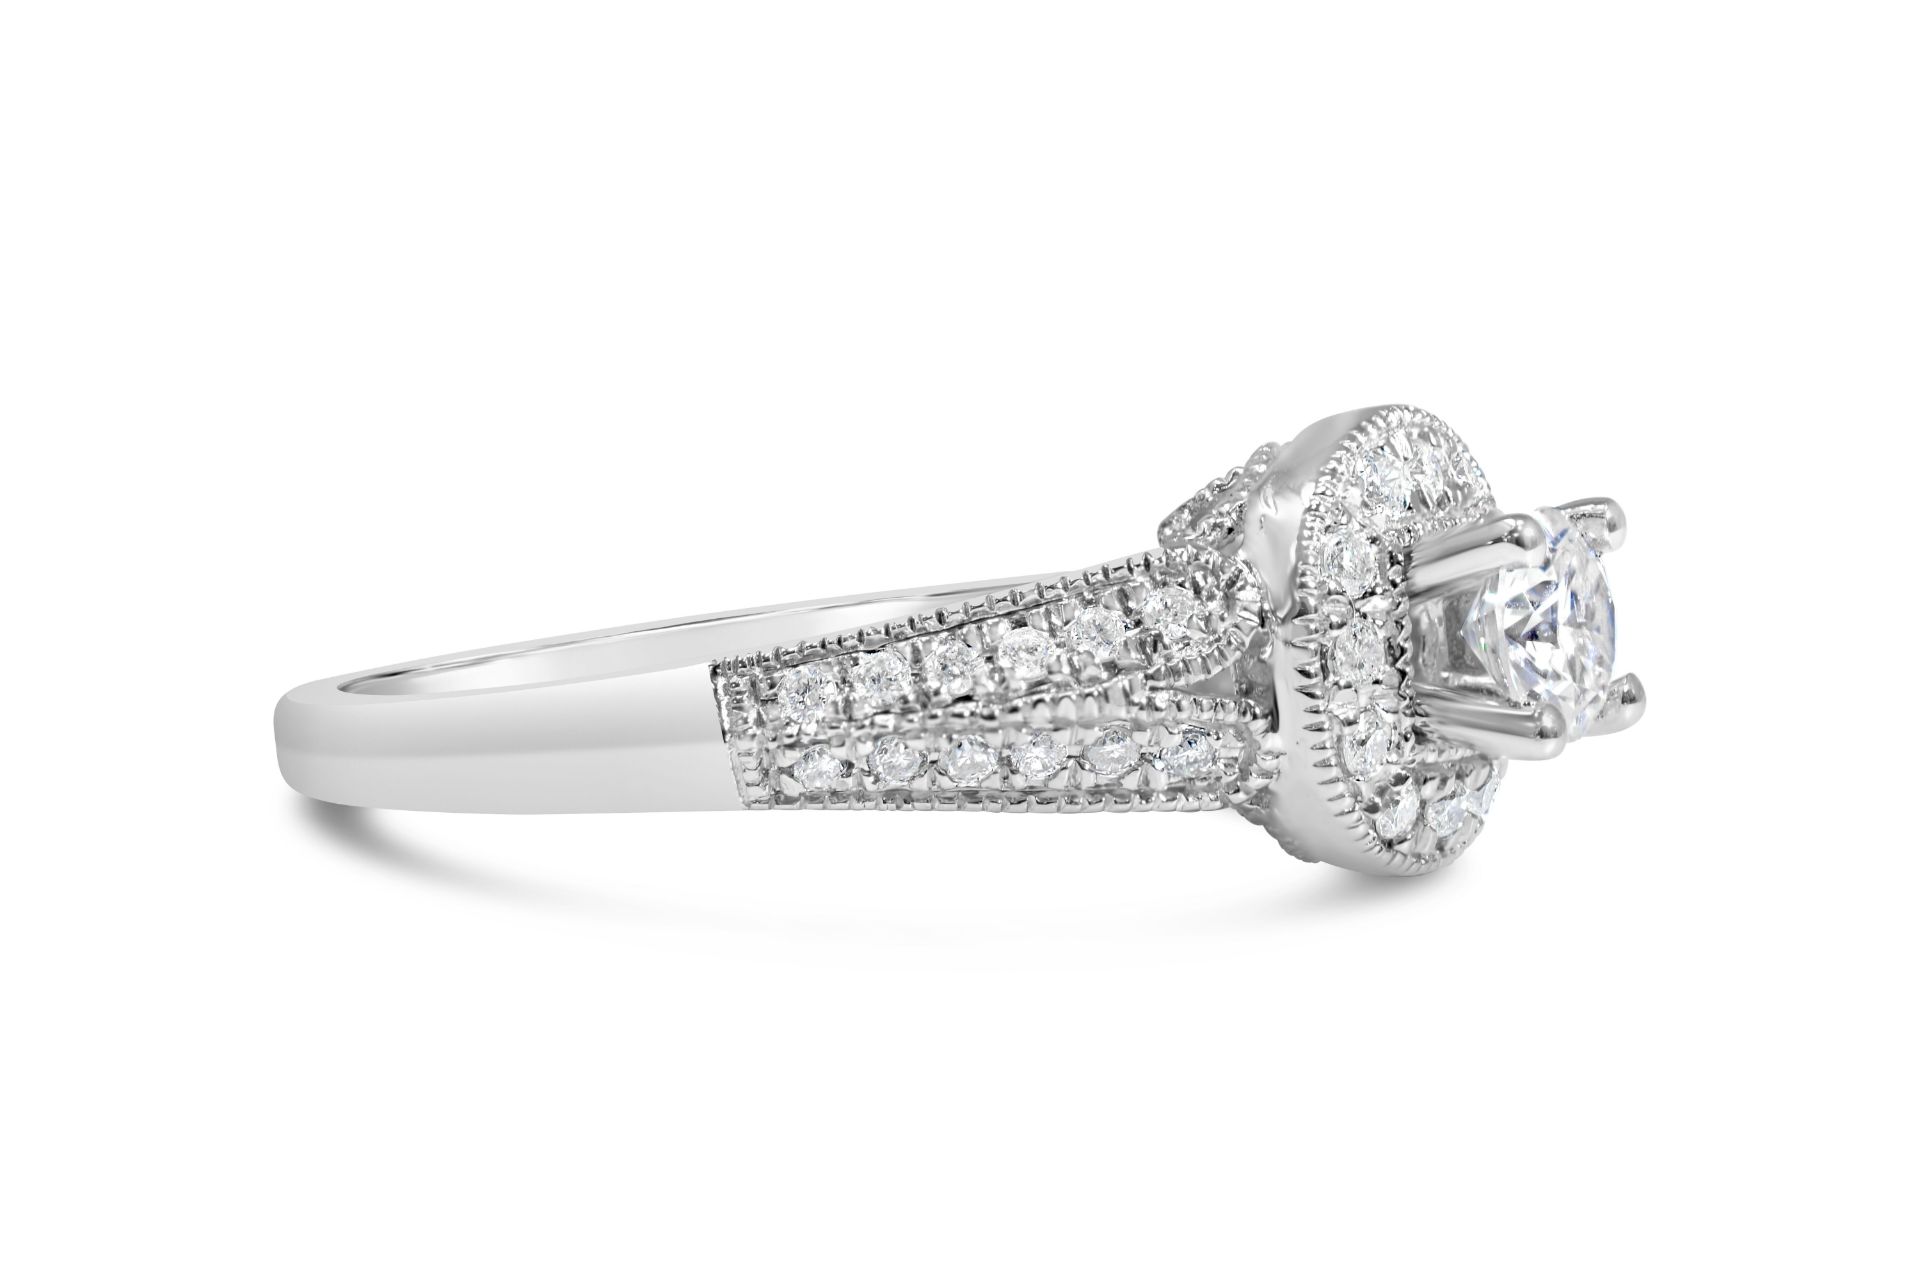 Bridal Set Of Diamond Engagement and Wedding Rings With Over 50 Diamonds in Total, Metal 9ct White - Image 3 of 4